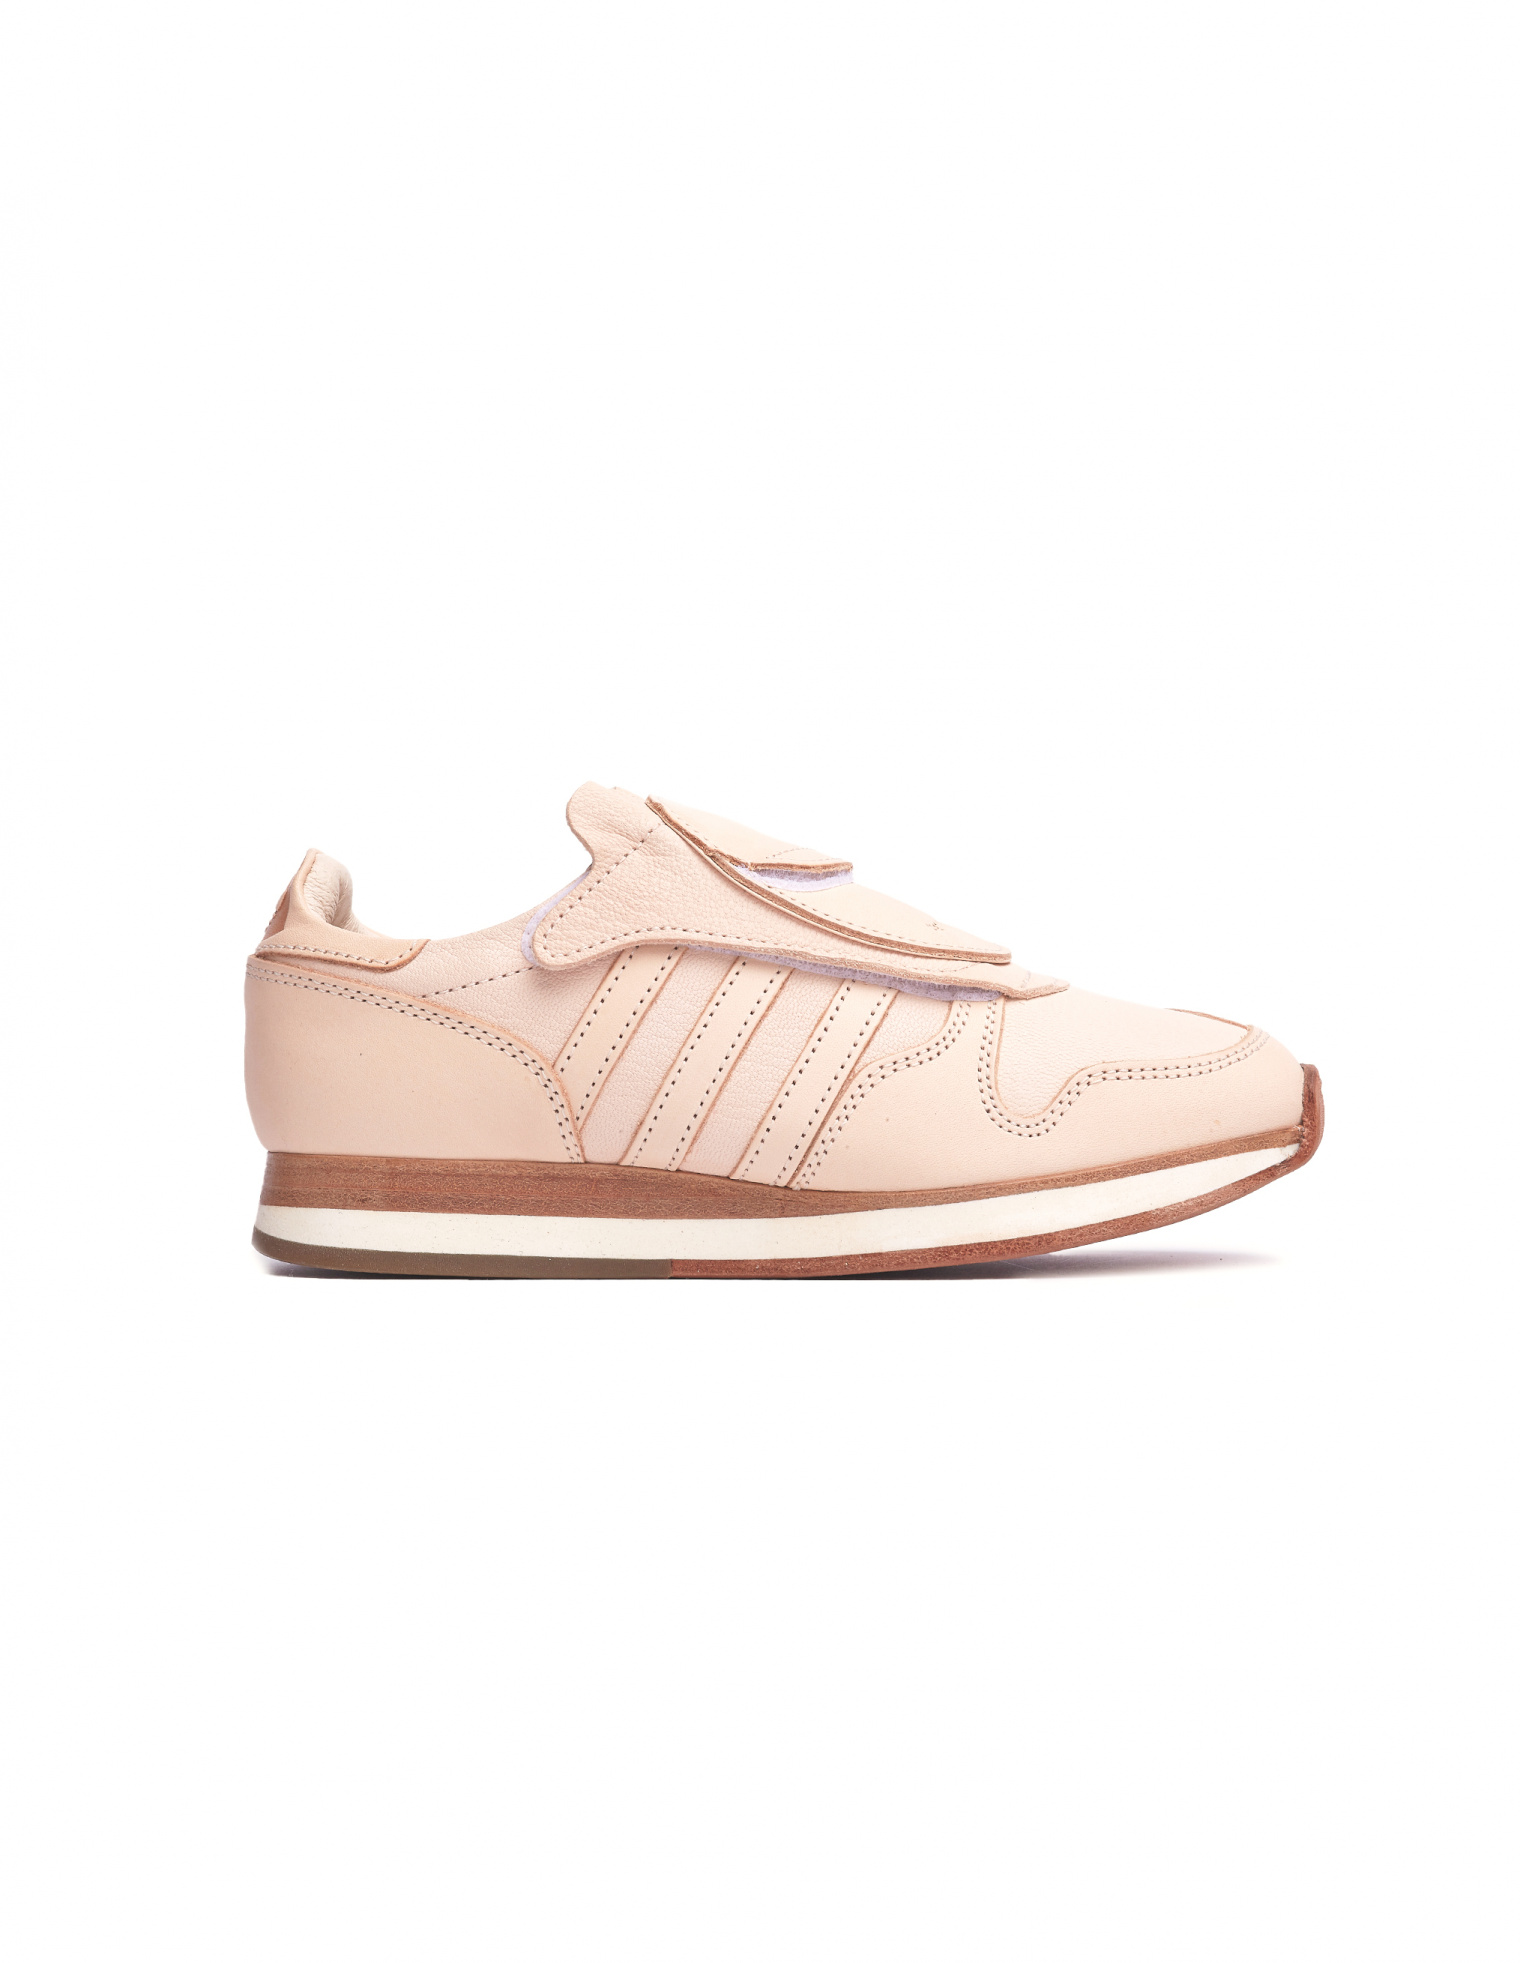 Hender Scheme Adidas Micropacer Leather Sneakers